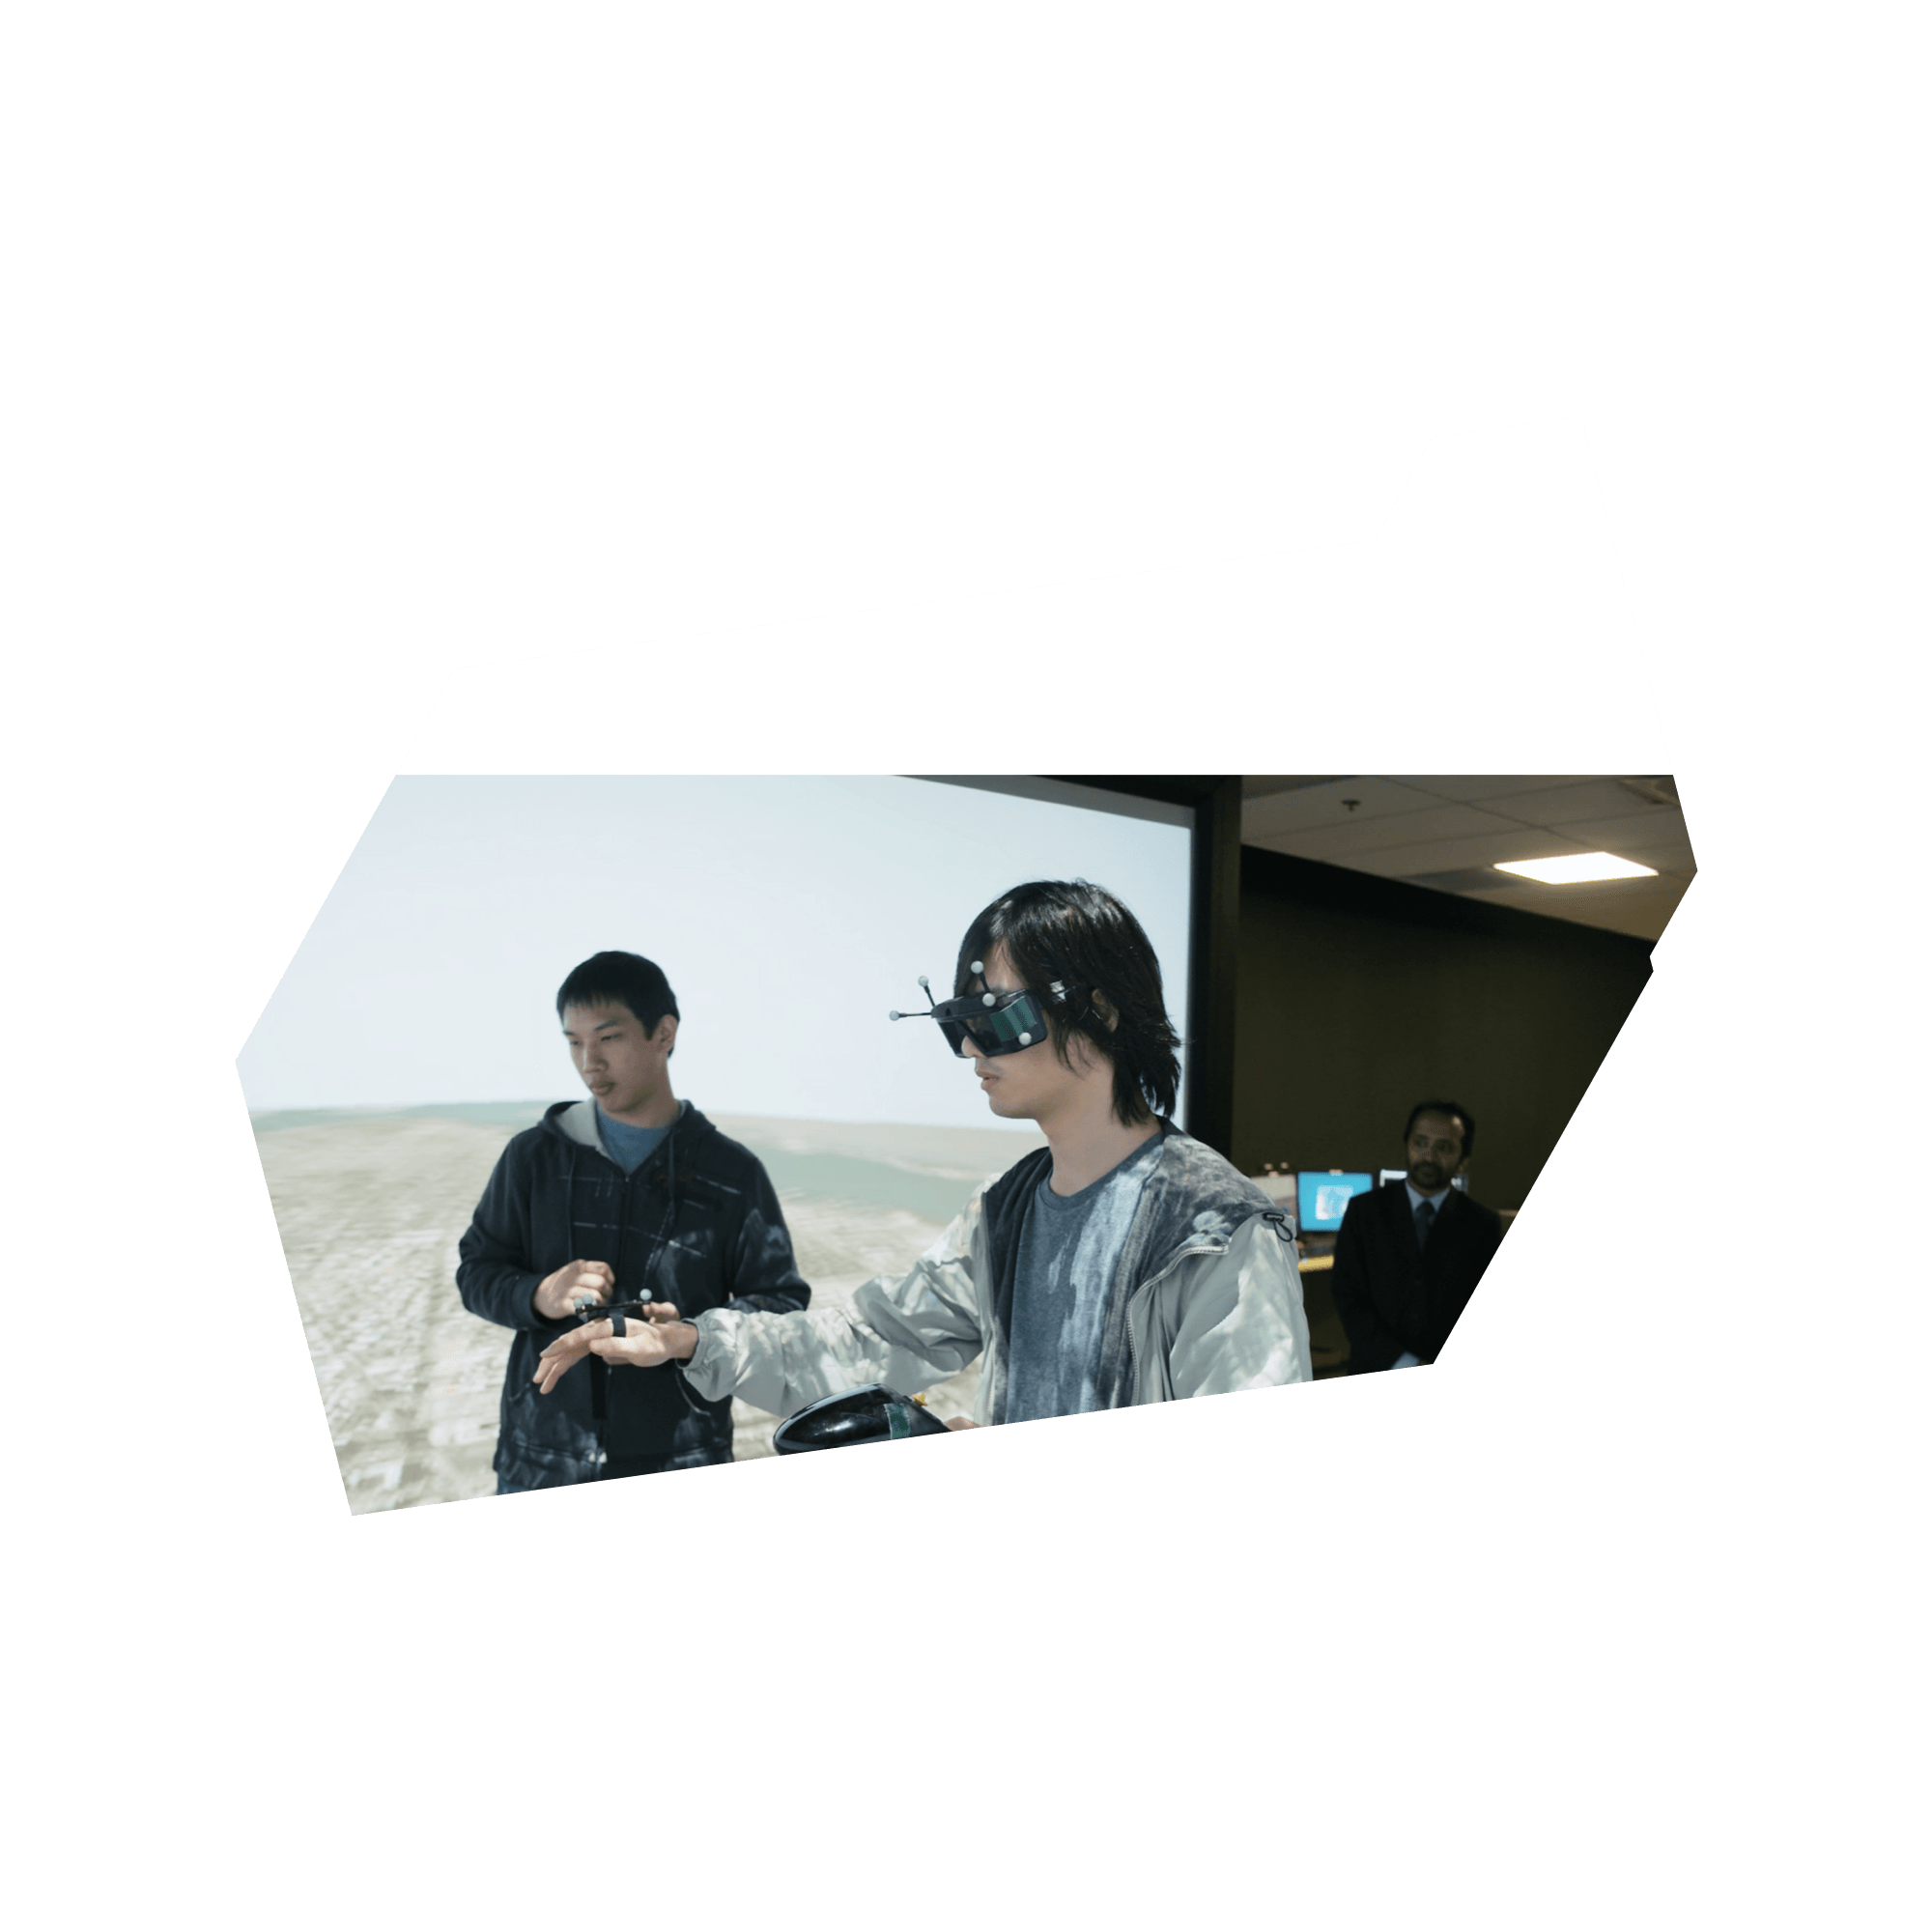 Masters student Randy Tan and PhD Candidate Zheng Wu stand inside an open cube structure with visualizations projected on the sides. Zheng Wu wears virtual reality glasses and holds controls for manipulating the visualizations. Naimul Khan, a professor in Electrical and Computer Engineering in the Faculty of Engineering and Architectural Science, watches from behind.